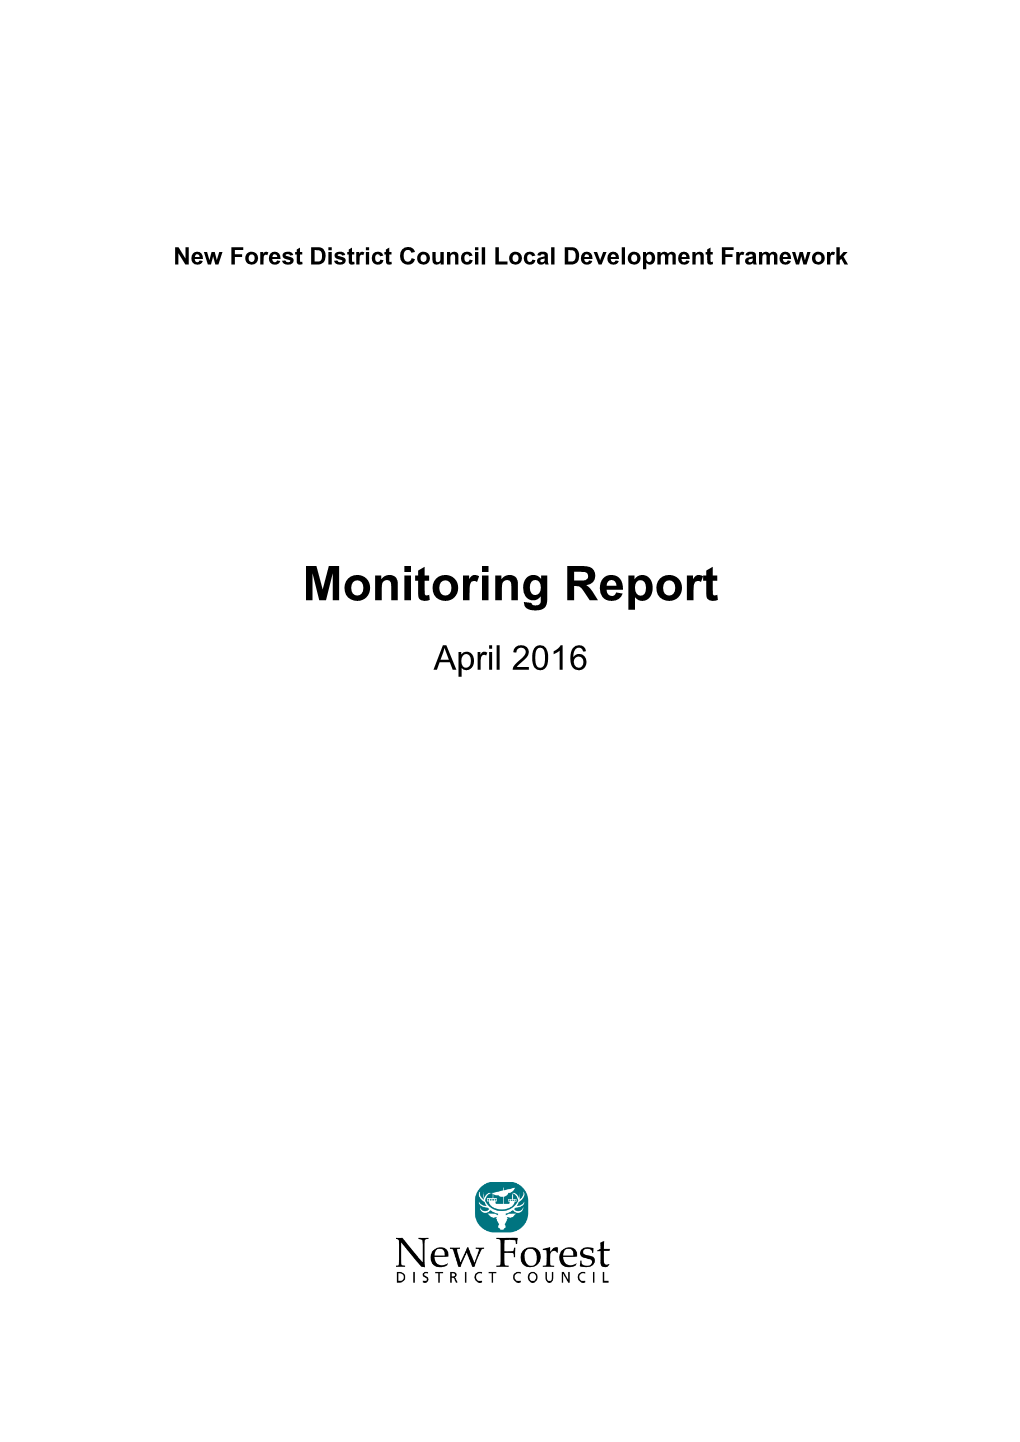 Read Our Monitoring Report